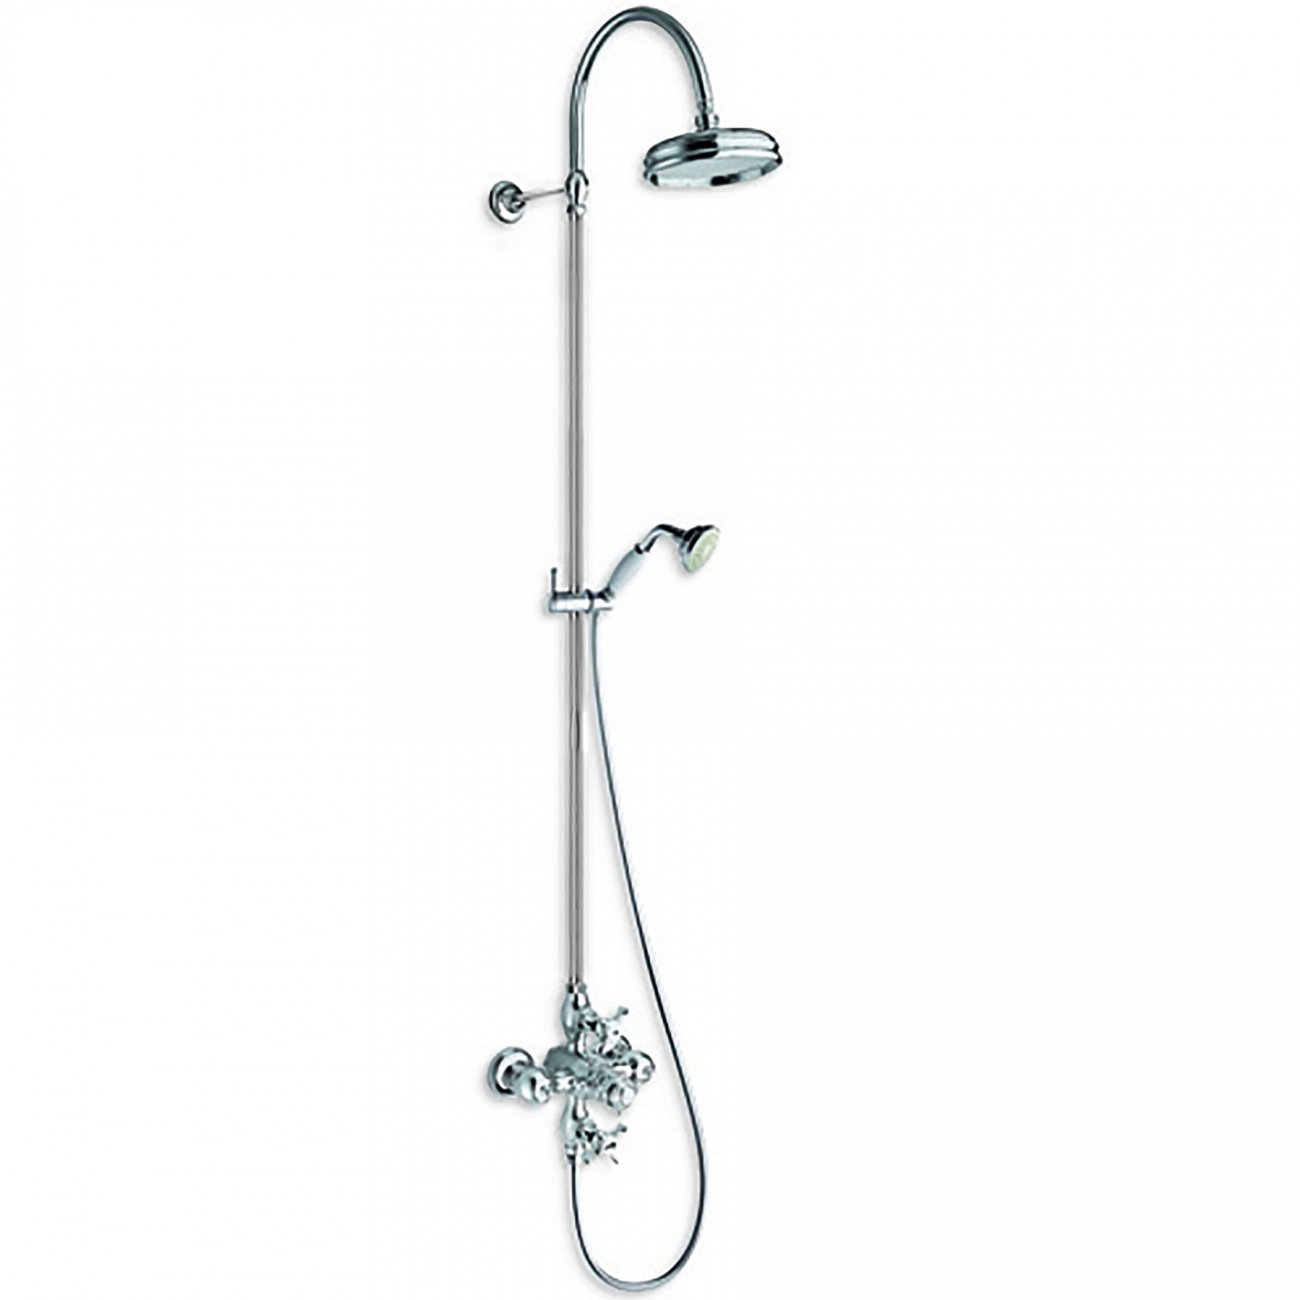 Cristina Classic Lines Canosa Wall Mounted Shower Thermostatic Mixer